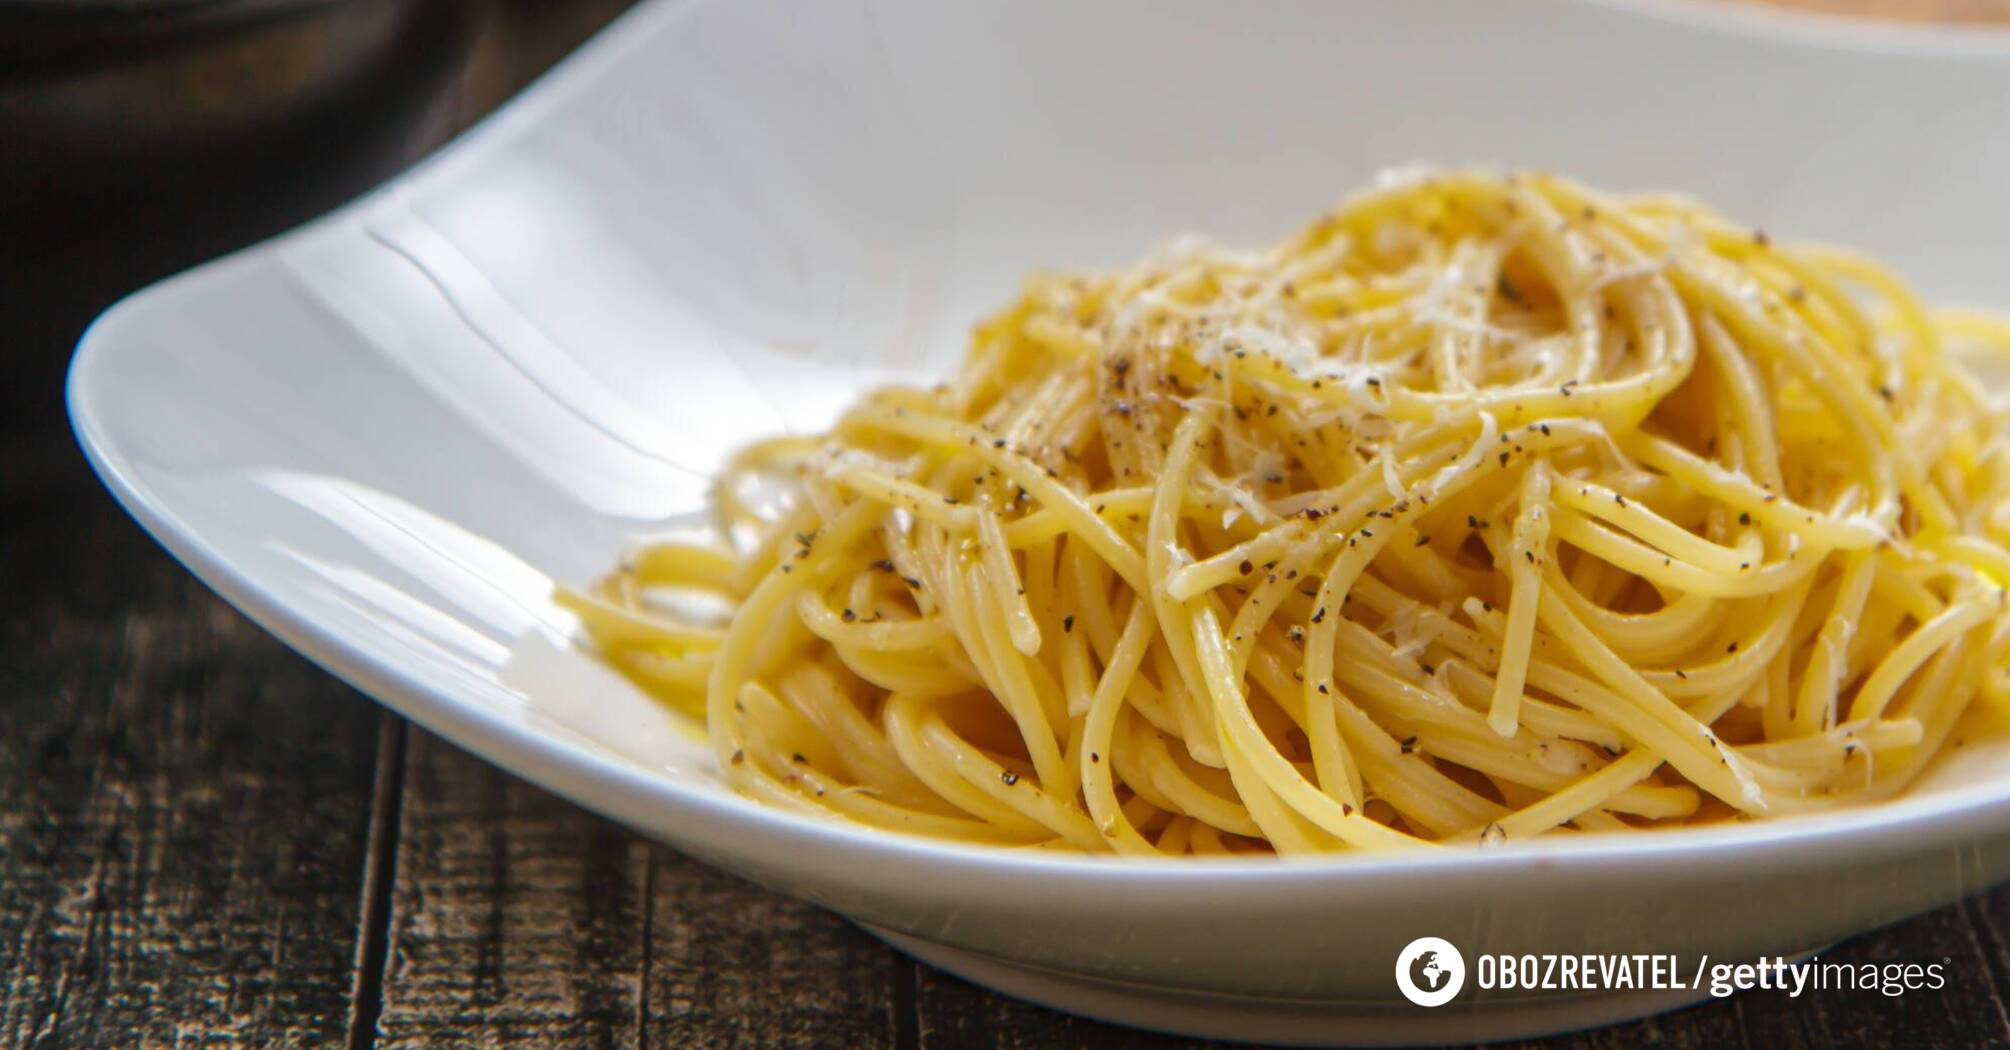 Stale pasta can lead to food poisoning